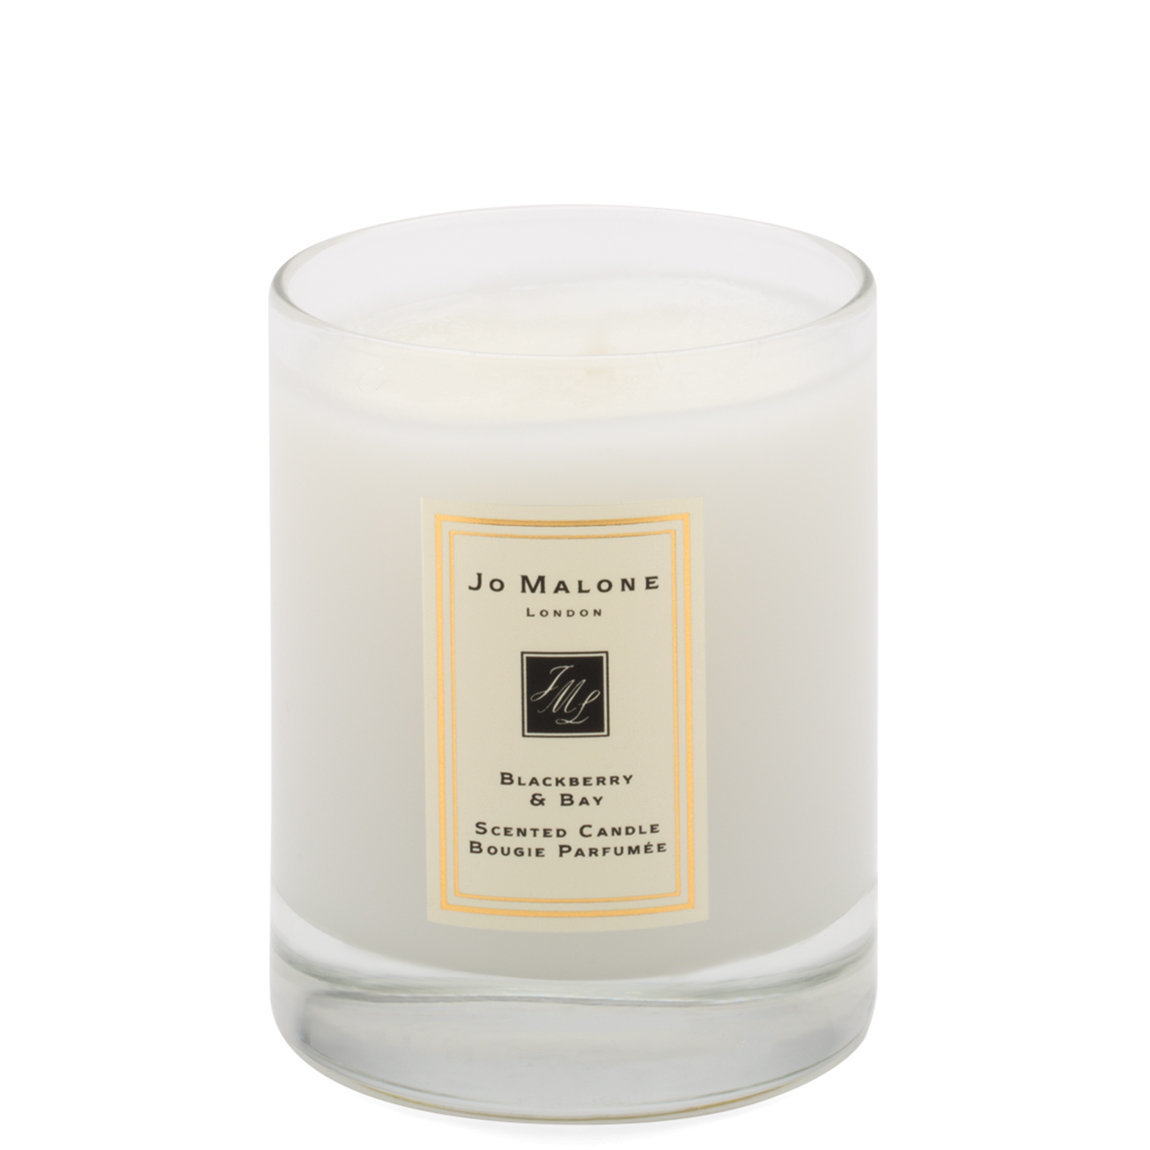 Jo Malone London Blackberry & Bay Scented Candle - 60g Travel ...